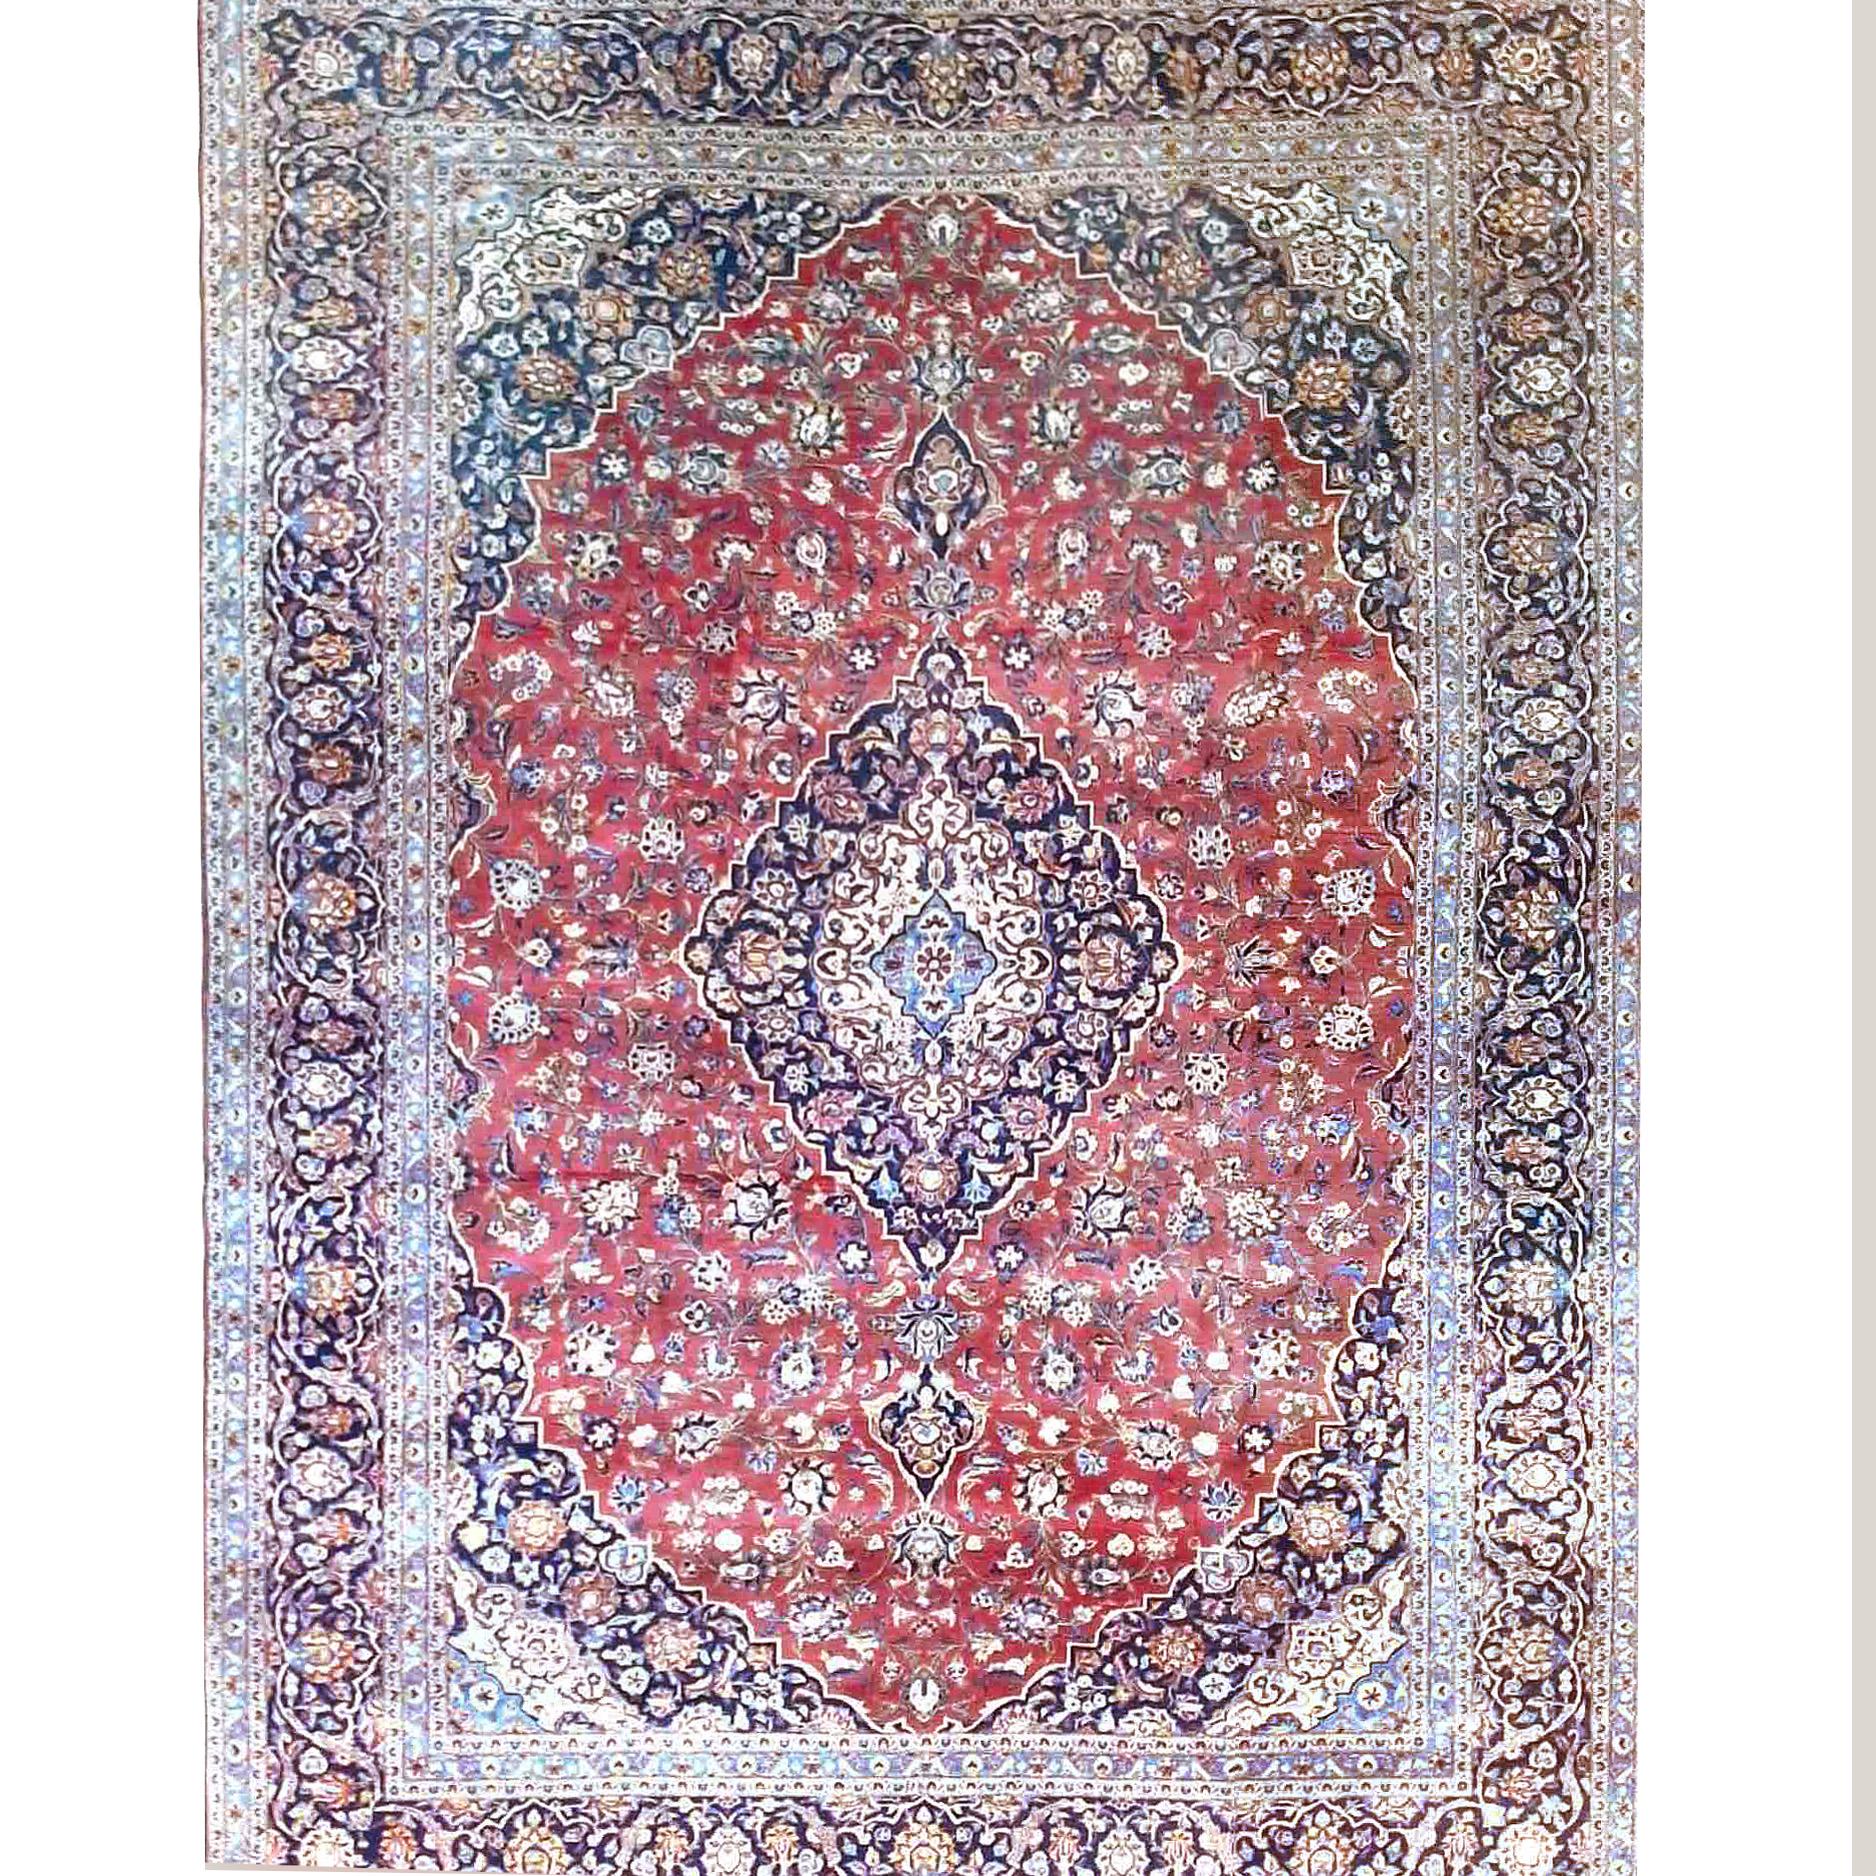 A Tabriz oriental room size rug offers wool construction with central medallion and foliate elements throughout, c1950

Measures - 175